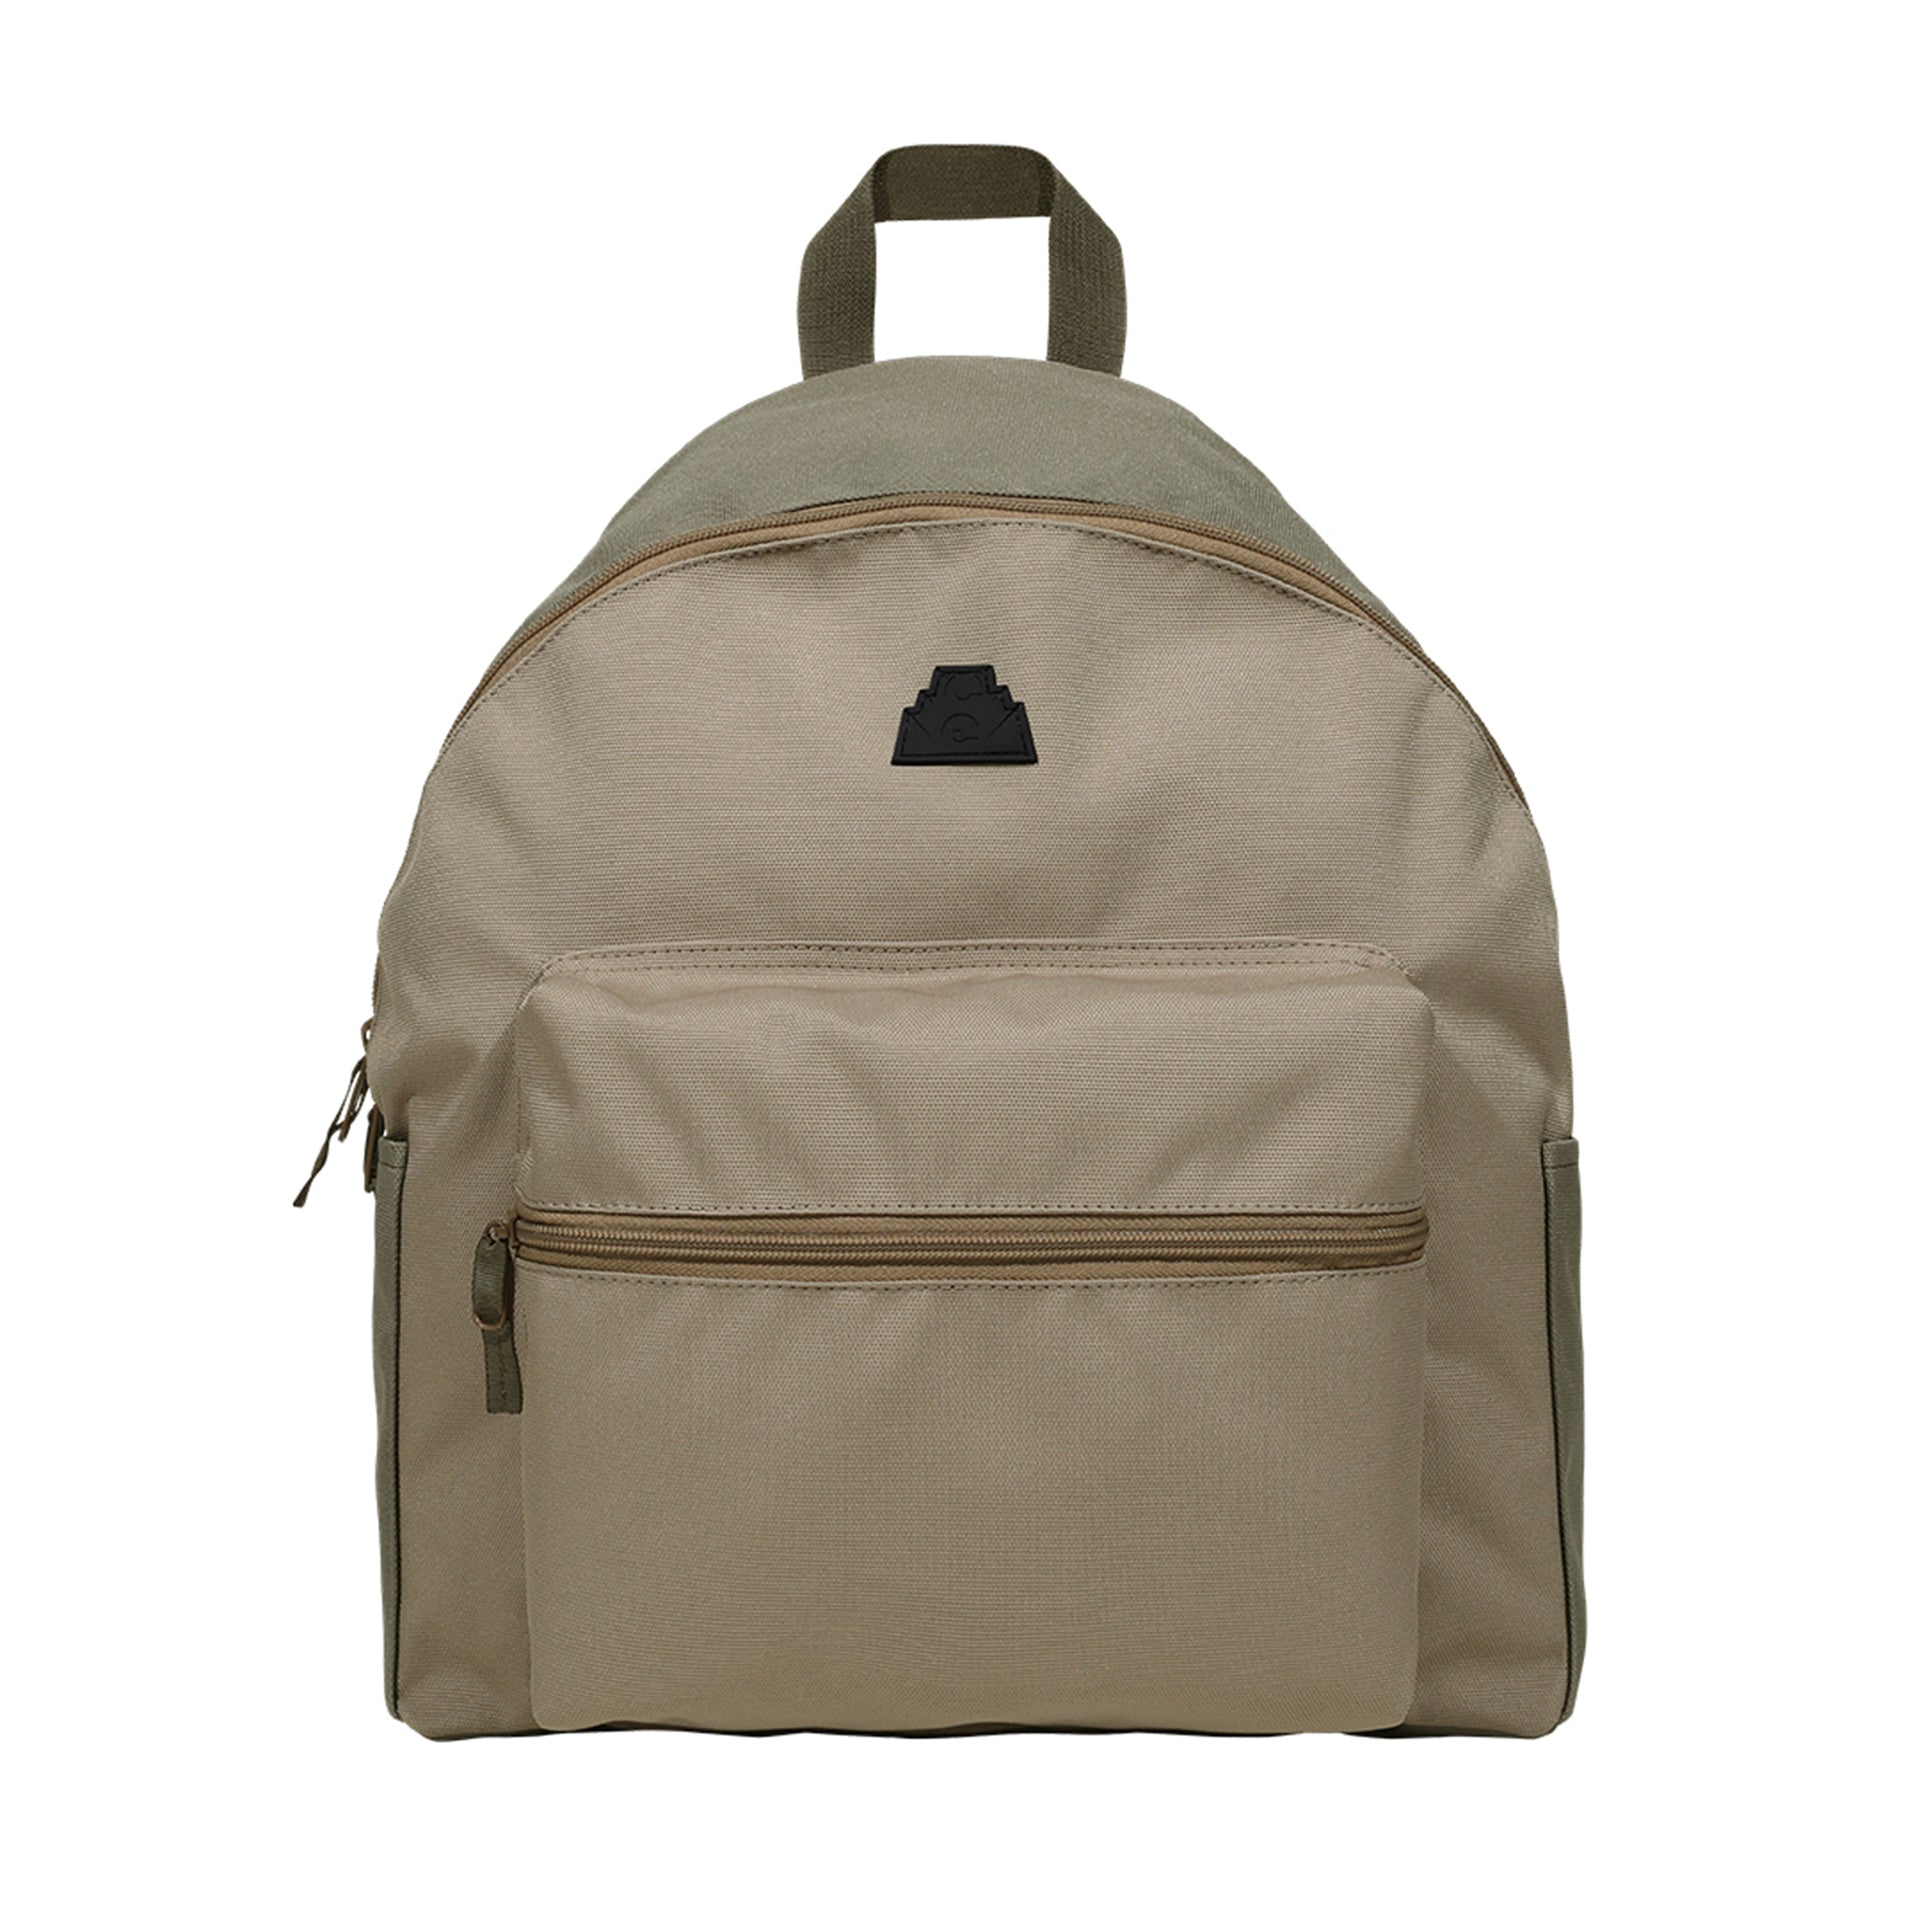 HEAVY PE CANVAS BACK PACK / BROWN